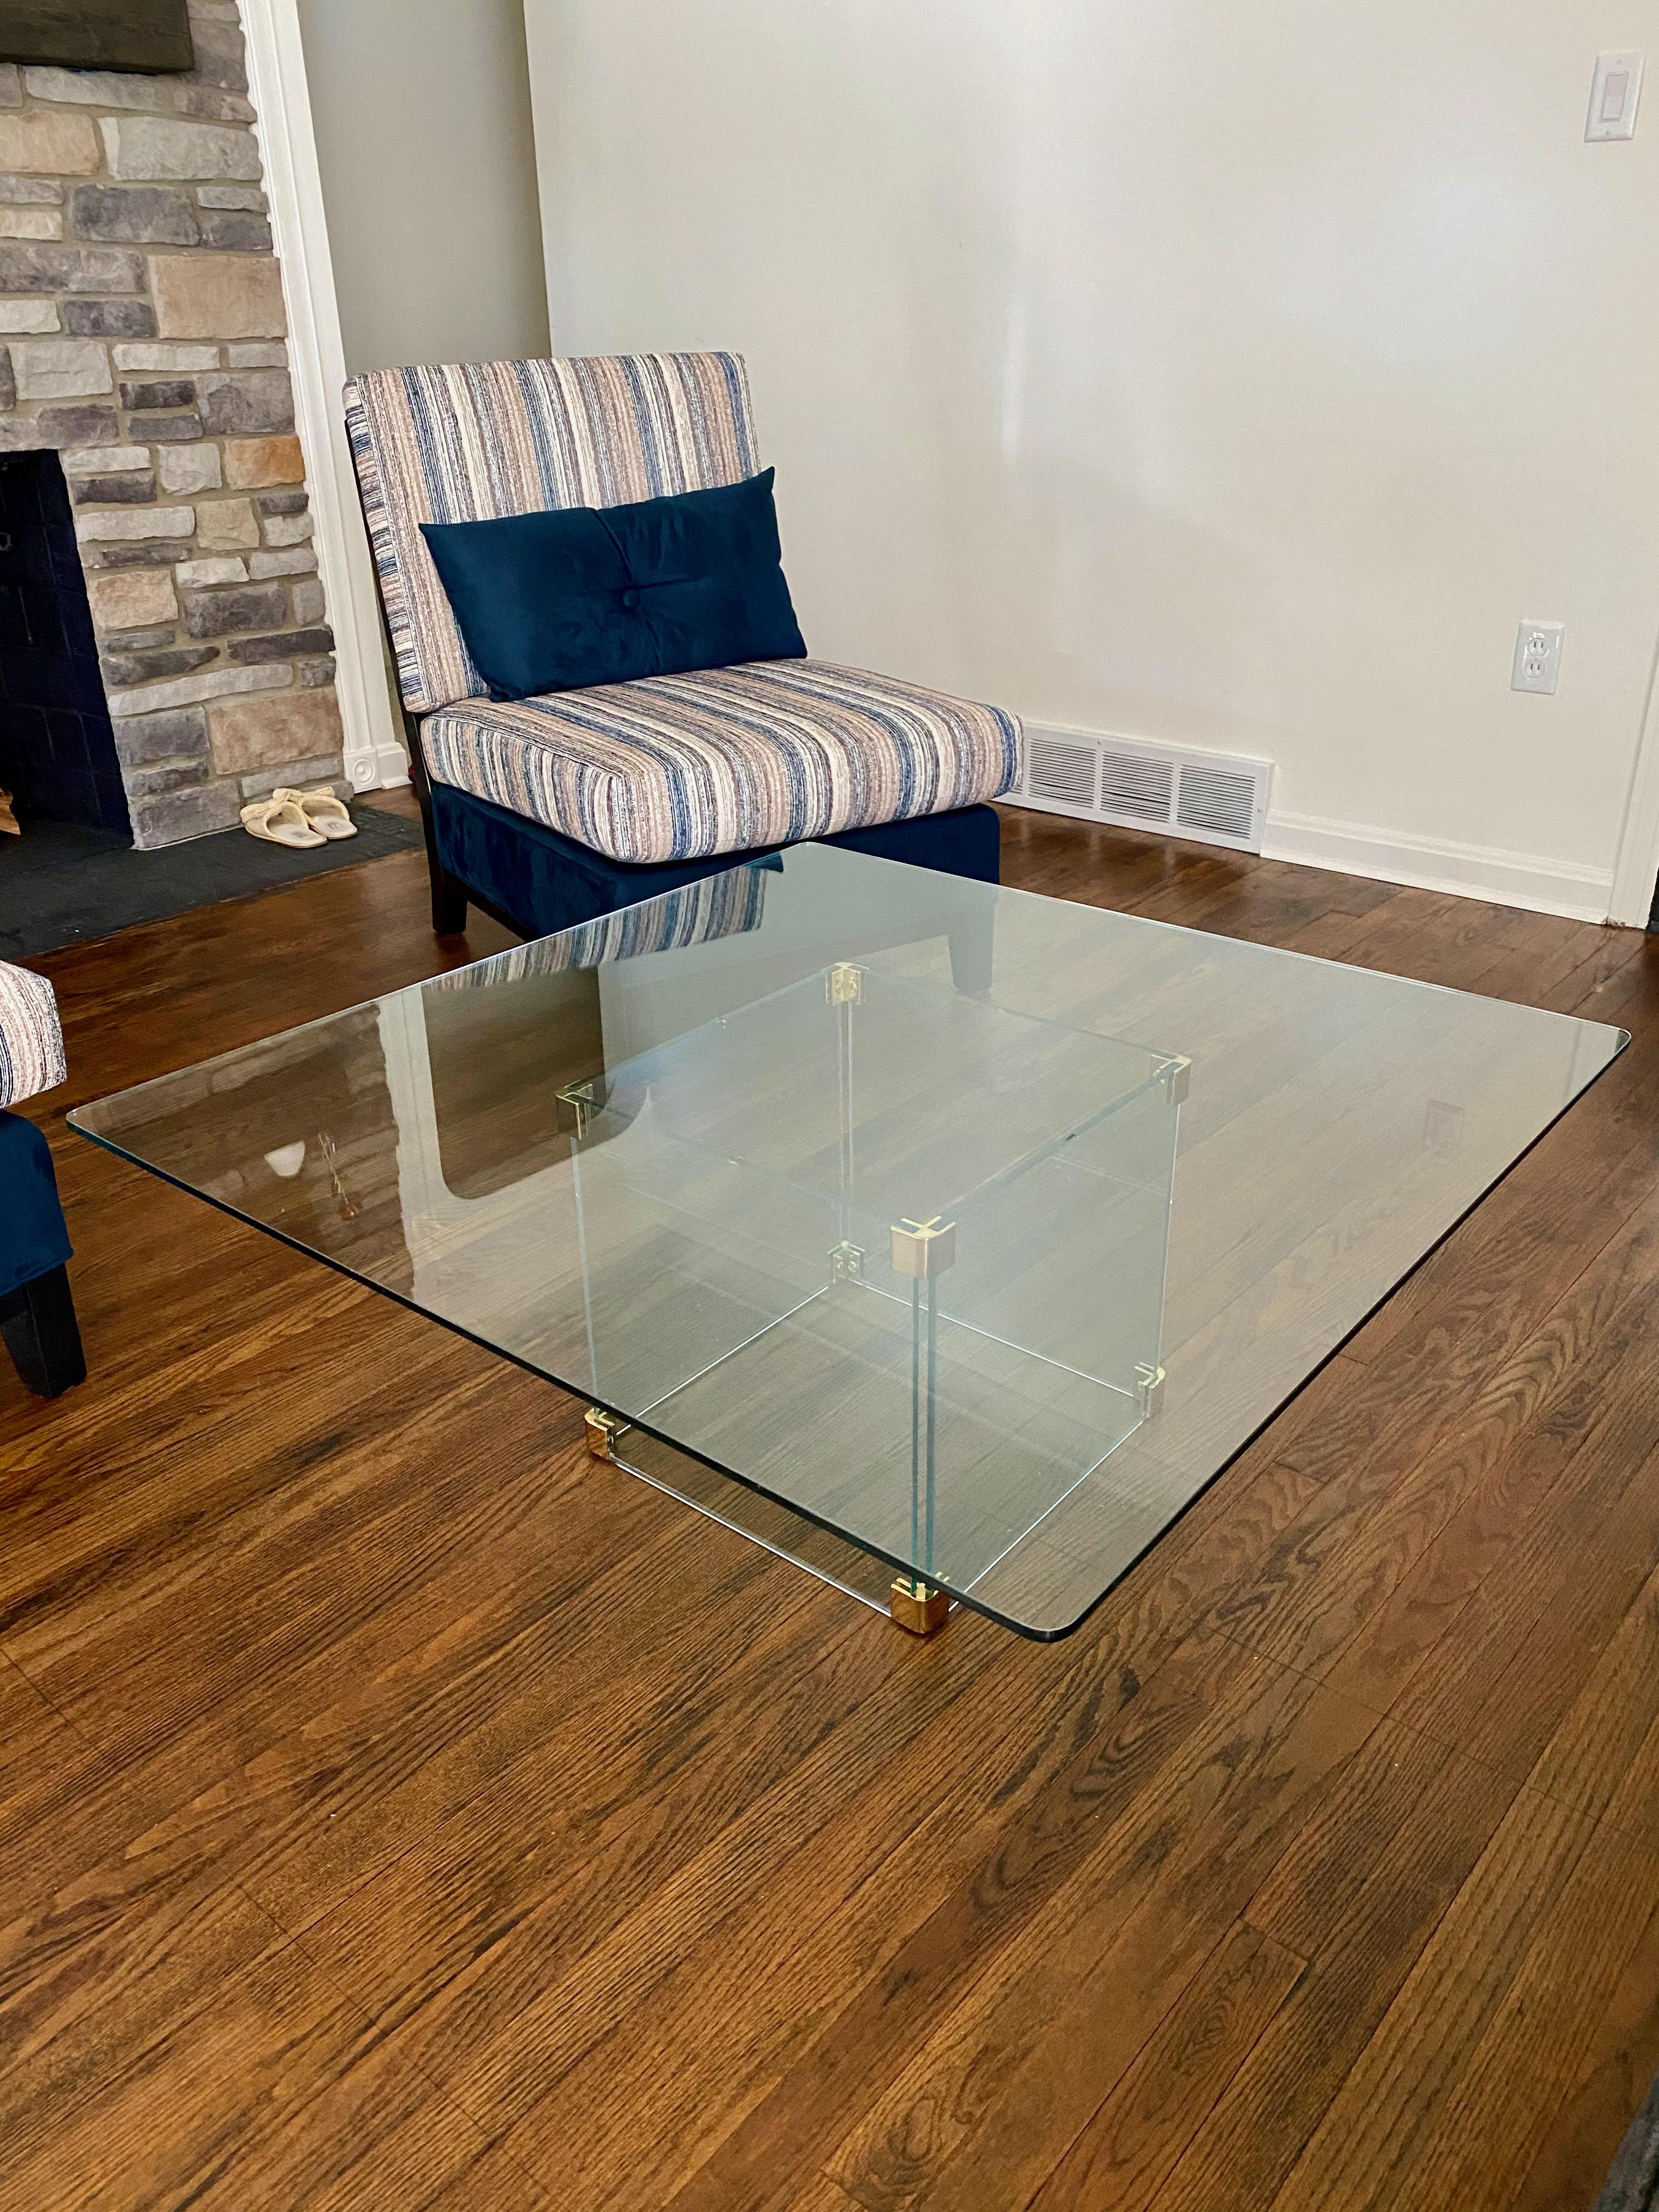 Beautifully designed large glass coffee table featuring brass brackets. No chips in the glass. Removable glass top, rubber separations should be replaced but overall in amazing condition.